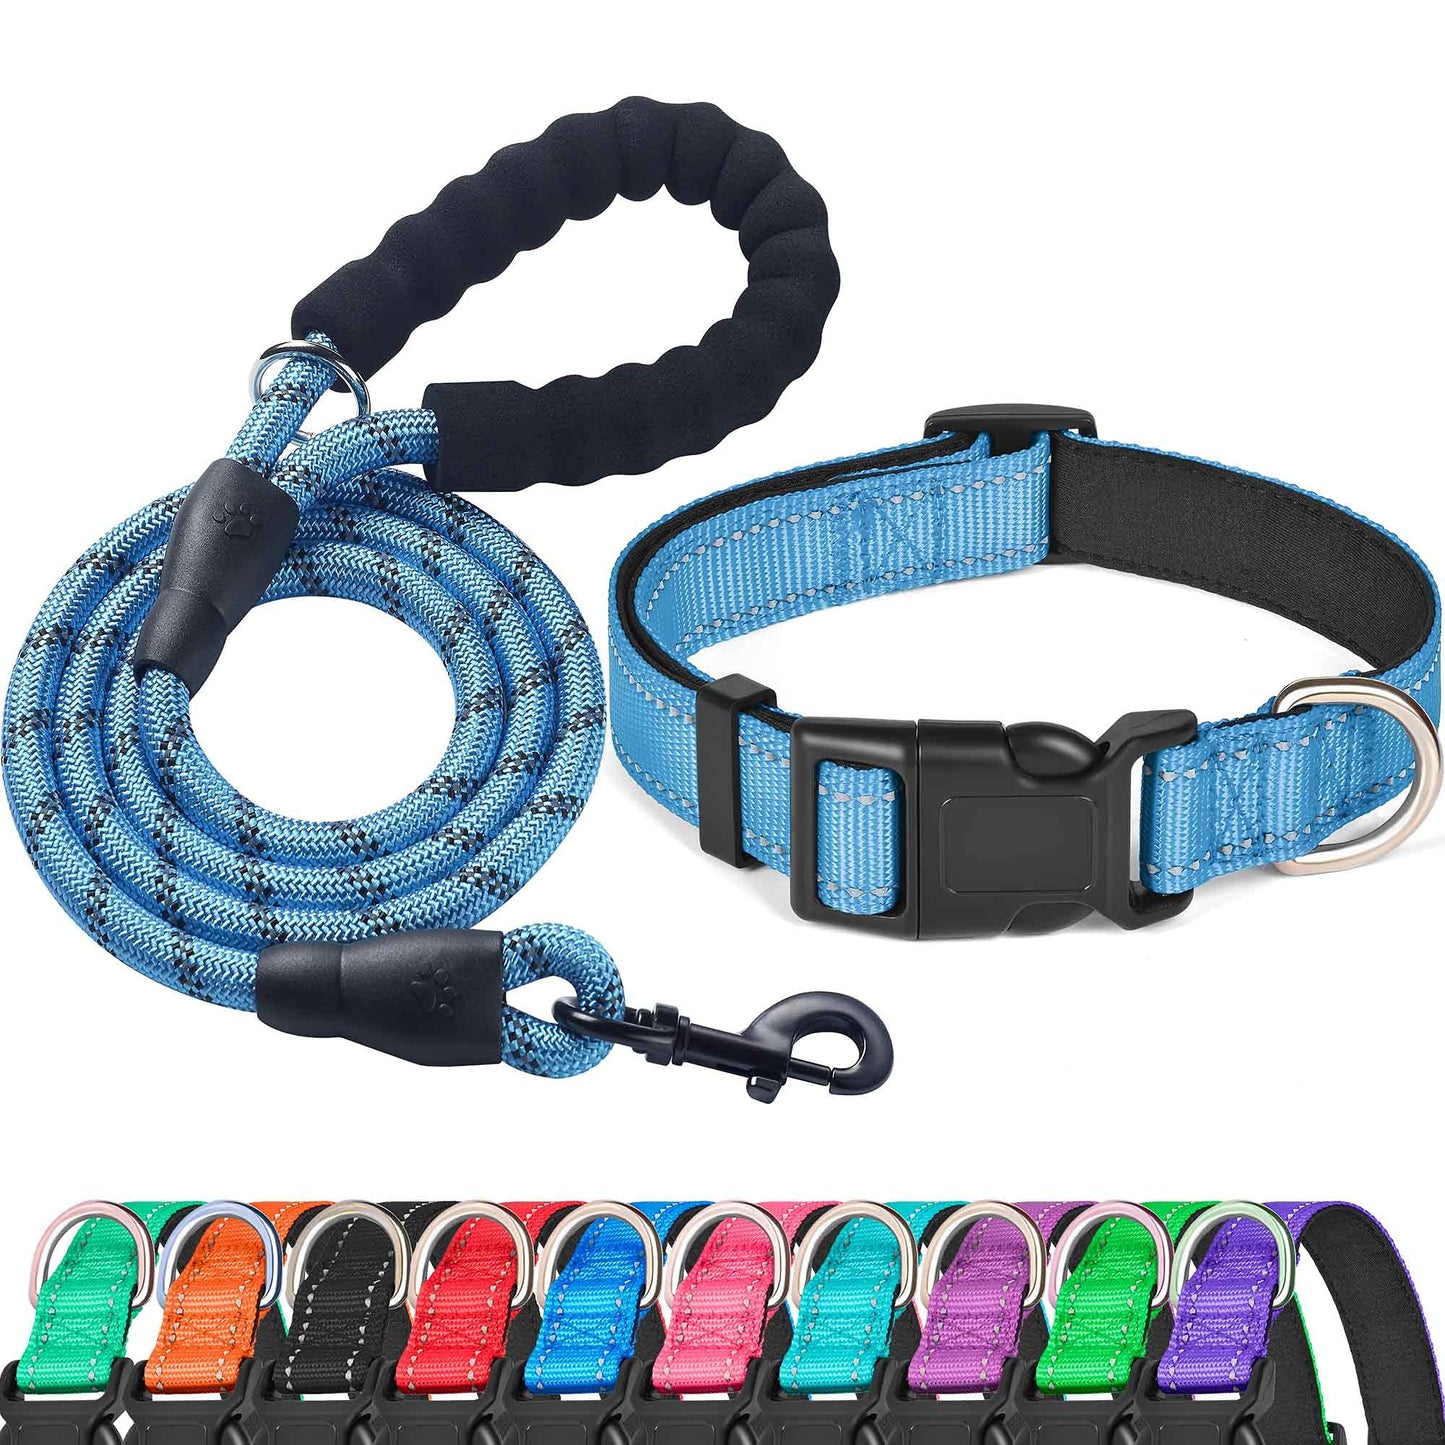 Petrue Reflective Dog Collar Padded with Soft Neoprene Breathable Adjustable Nylon Dog Collars for Small Medium Large Dogs